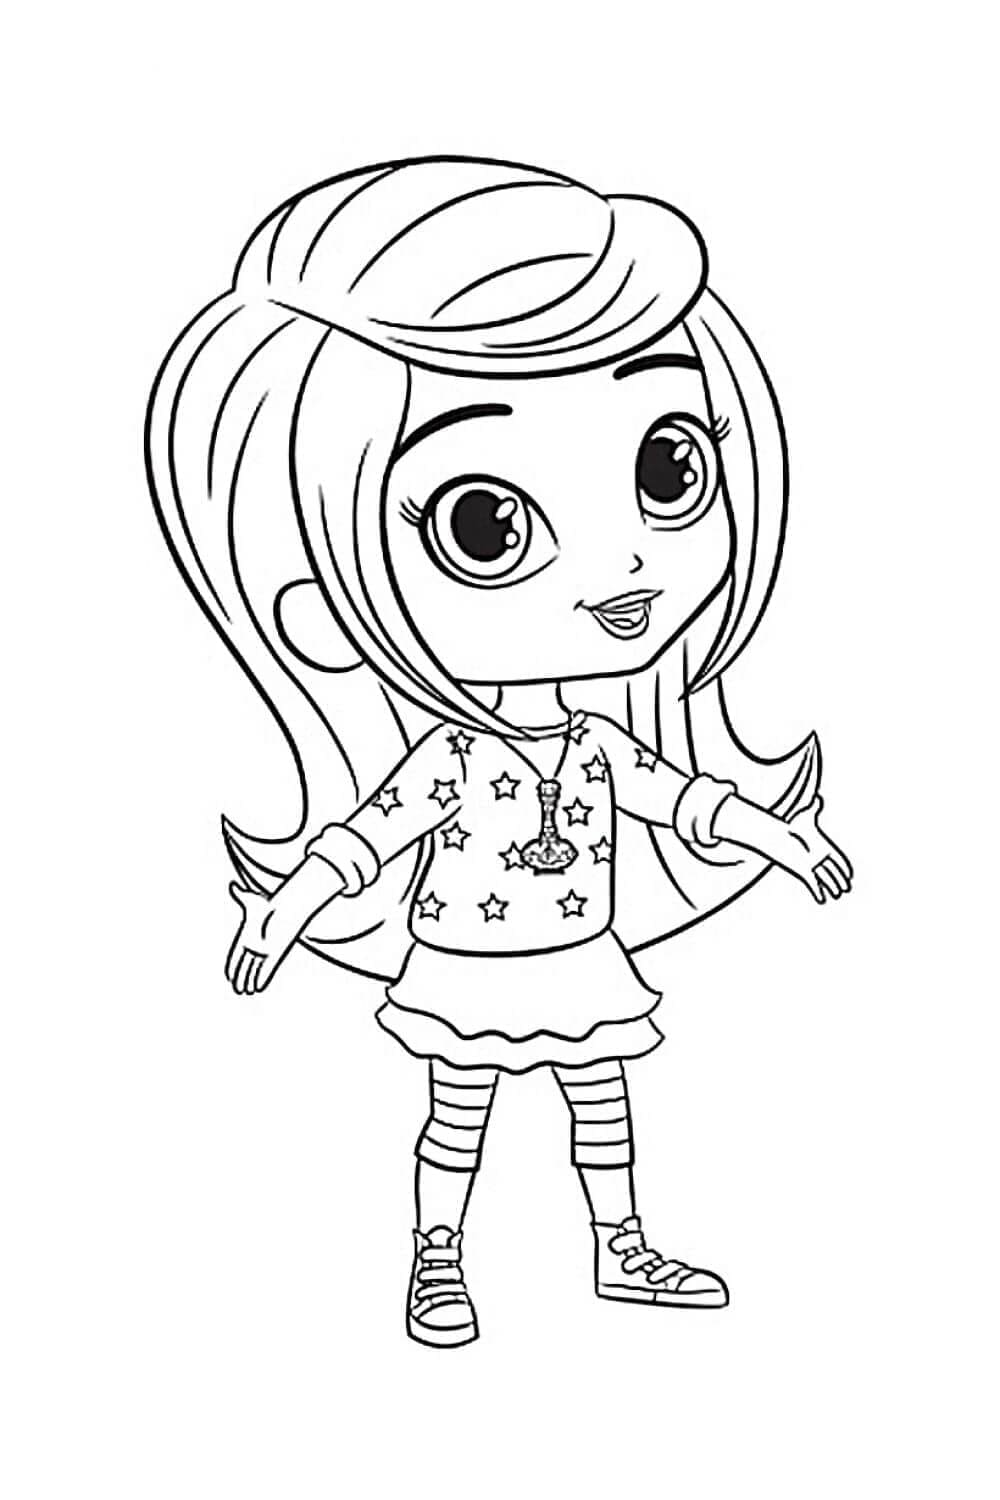 Leah in Shimmer and Shine coloring page - Download, Print or Color ...